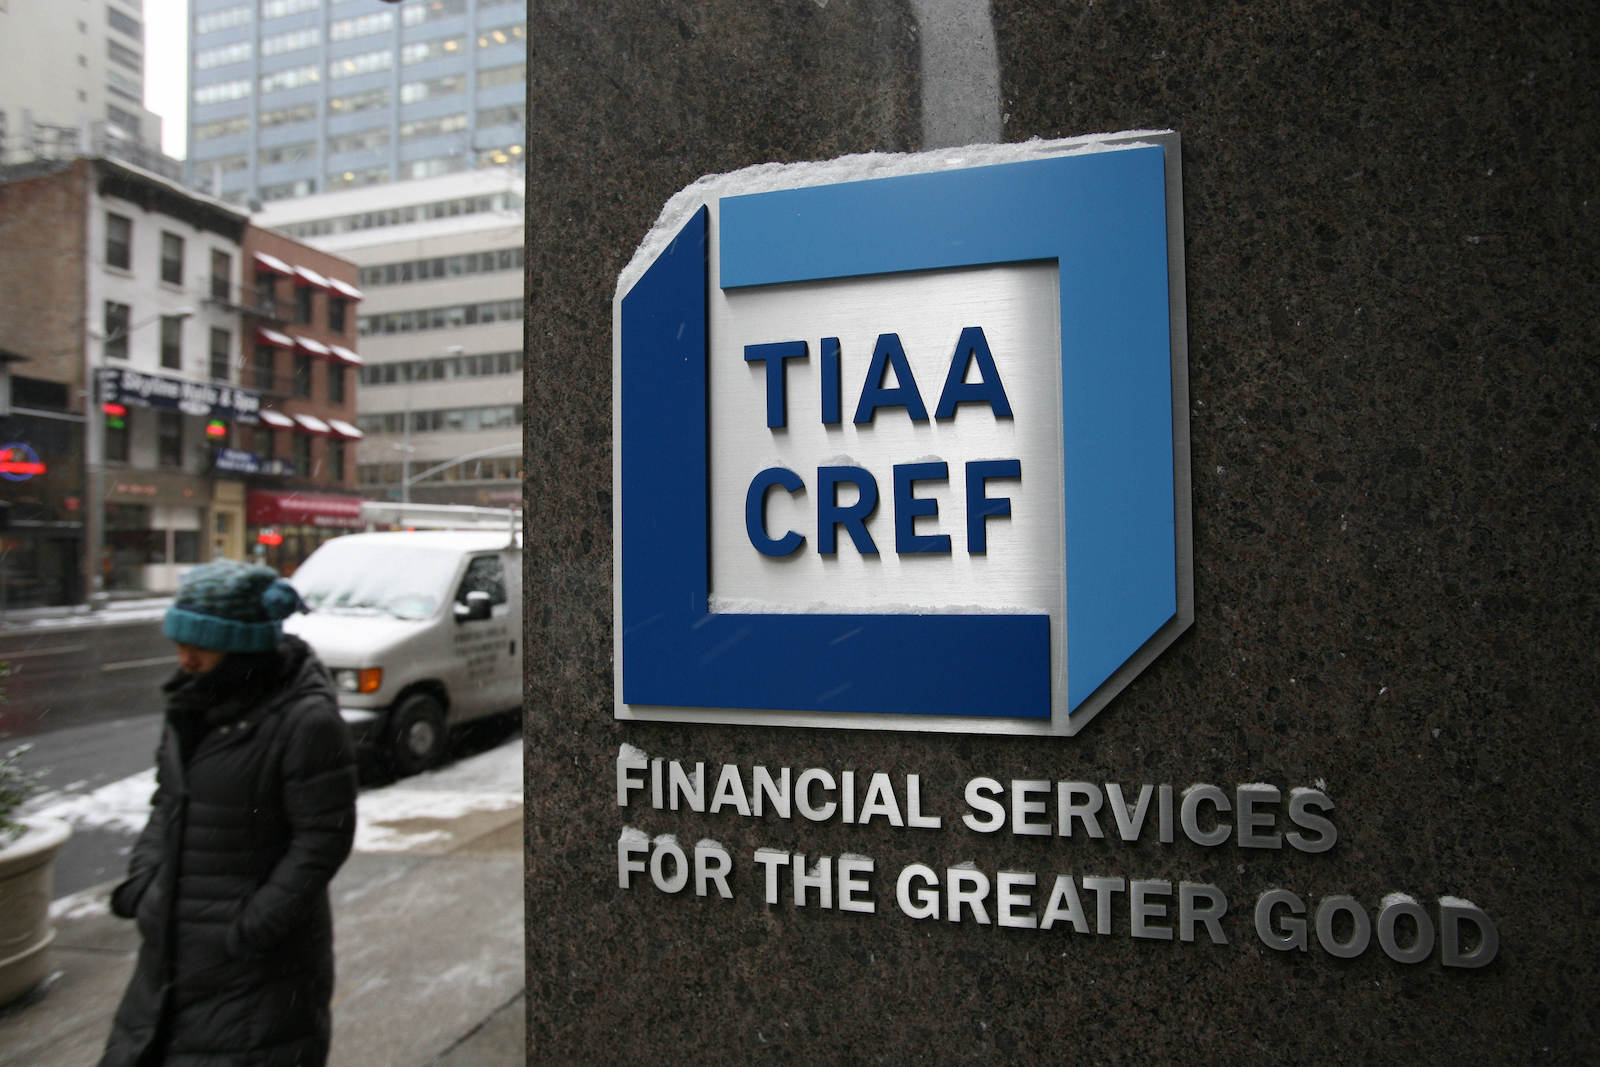 a winter-bundled person walks by a building with a logo for TIAA CREF with the words underneath it "financial services for the greater good"